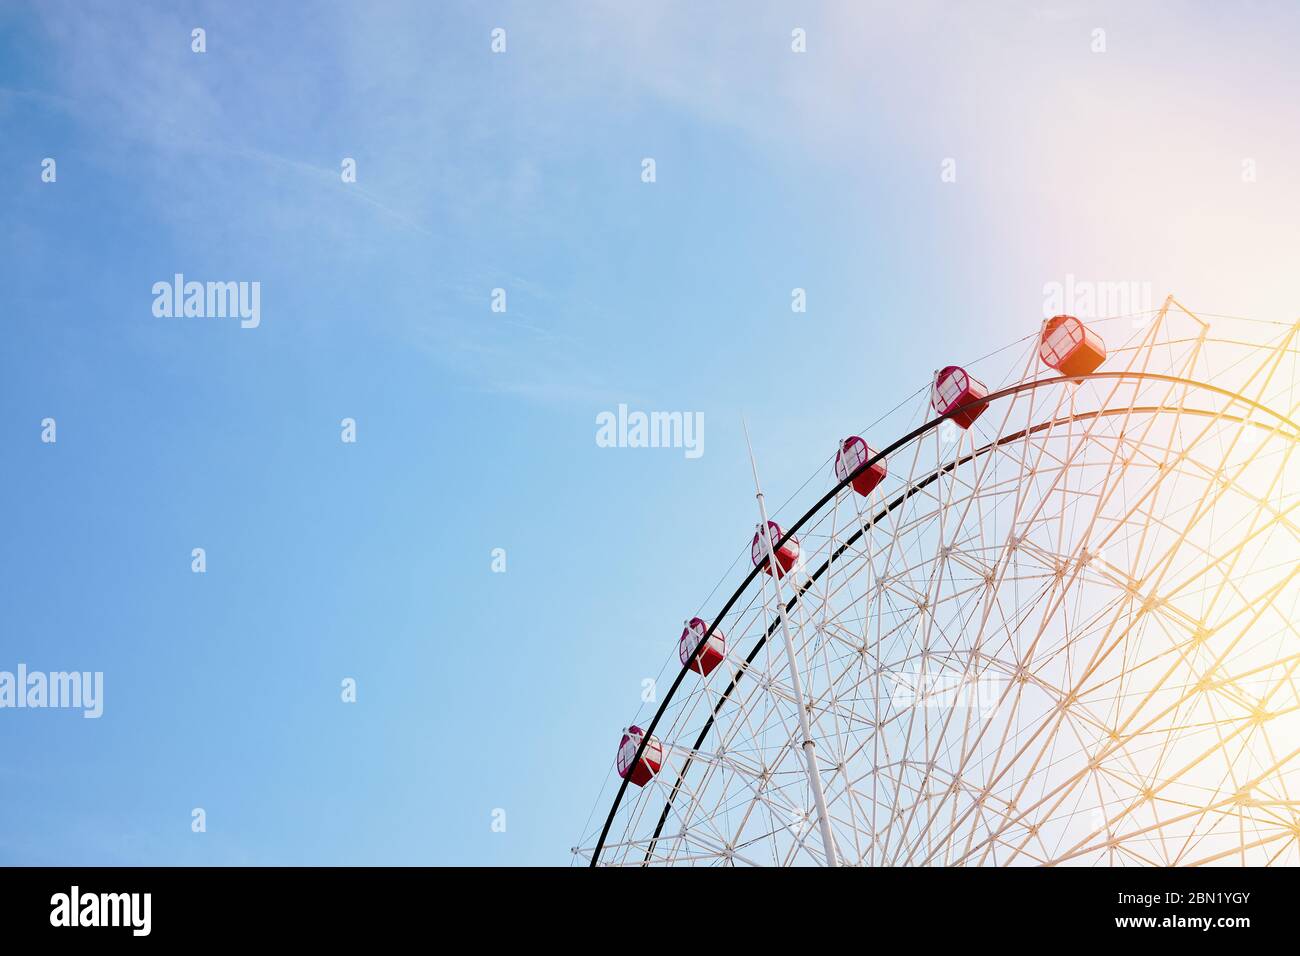 Ferris wheel with bright red booths on background of serene clear blue sky with sunflare as symbol of joy recreation relaxation fun and good time, wit Stock Photo